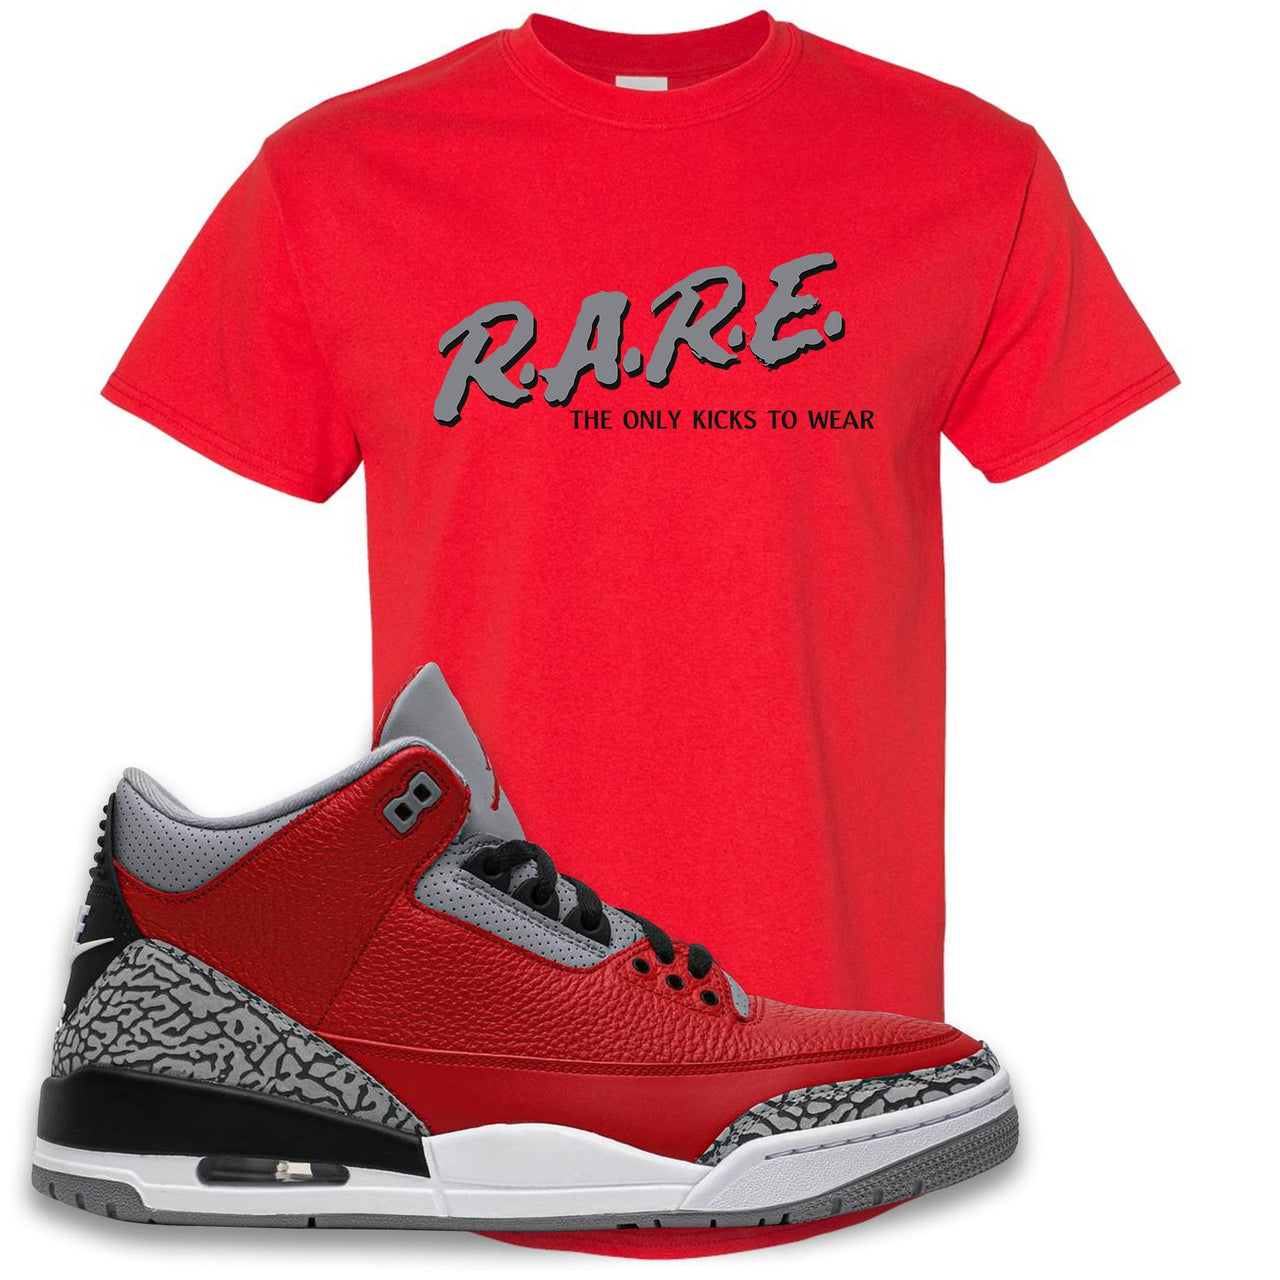 Jordan 3 Red Cement Chicago All-Star Sneaker True Red T Shirt | Tees to match Jordan 3 All Star Red Cement Shoes | Rare